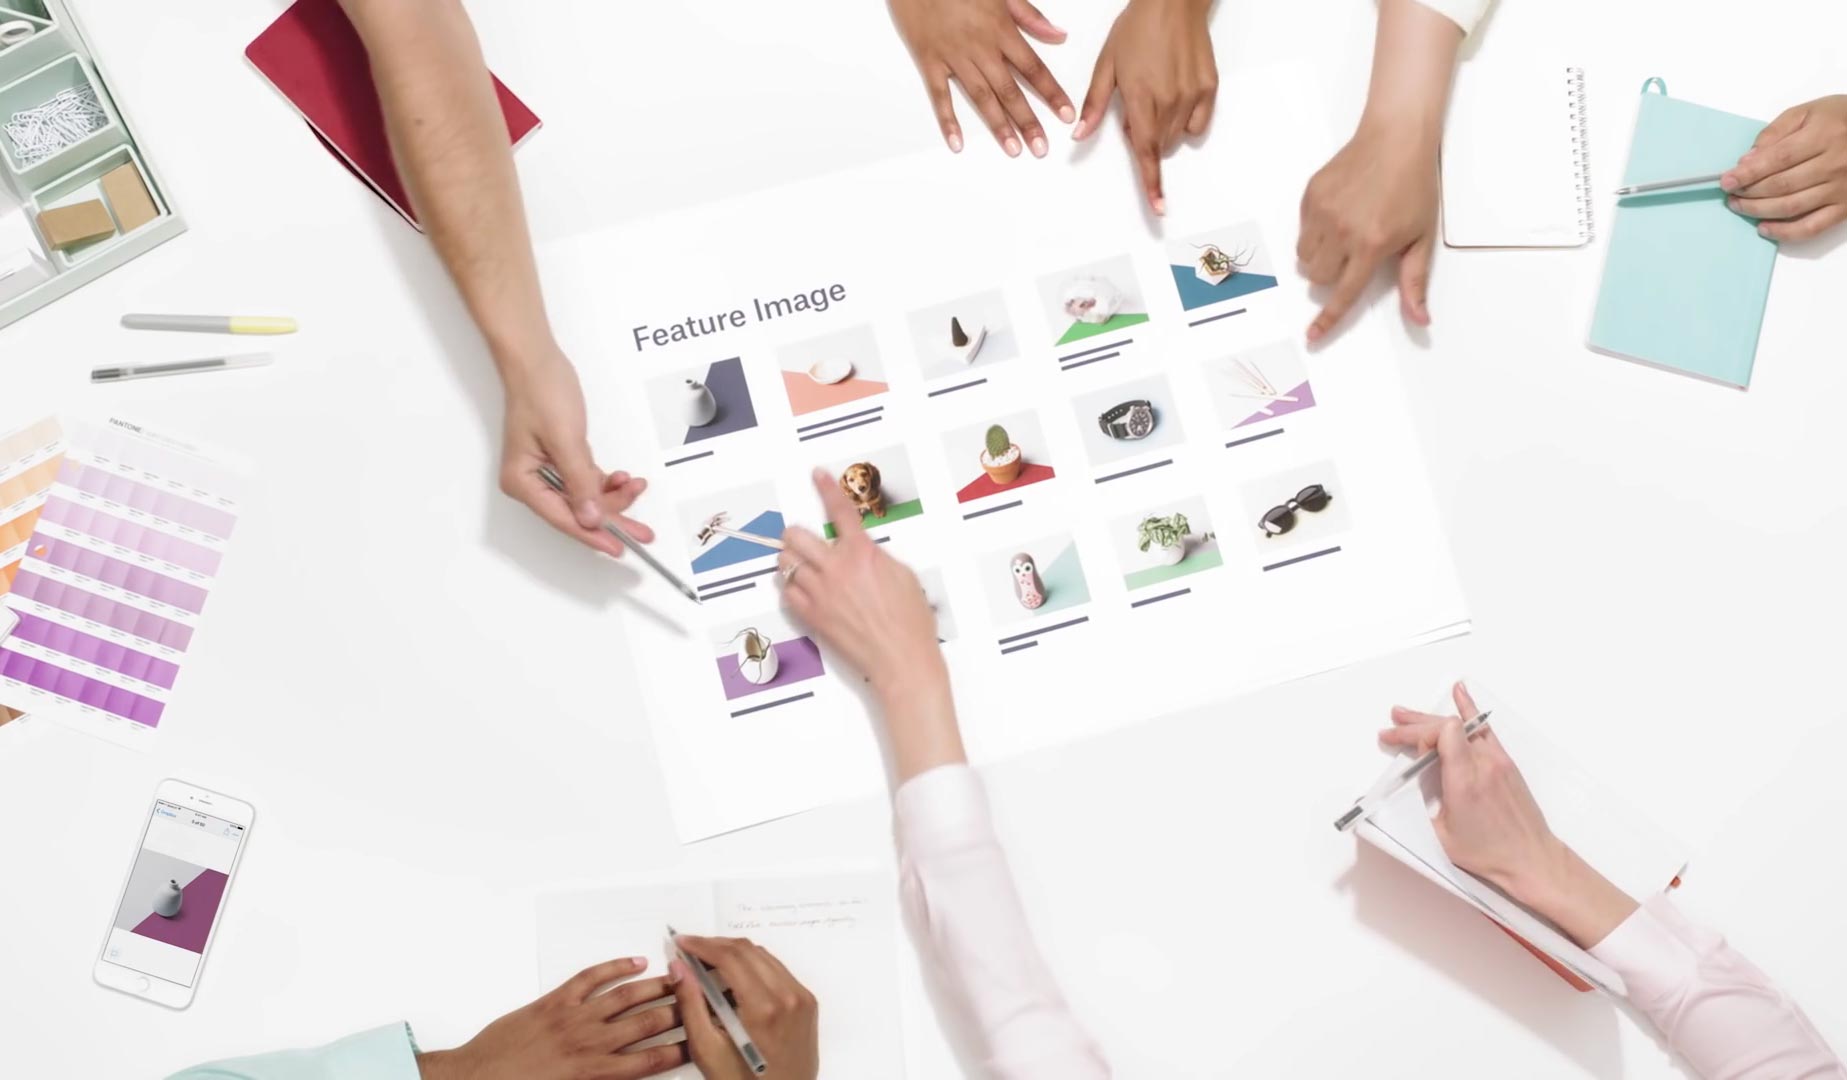 Multiple hands pointing to a piece of paper with images under review